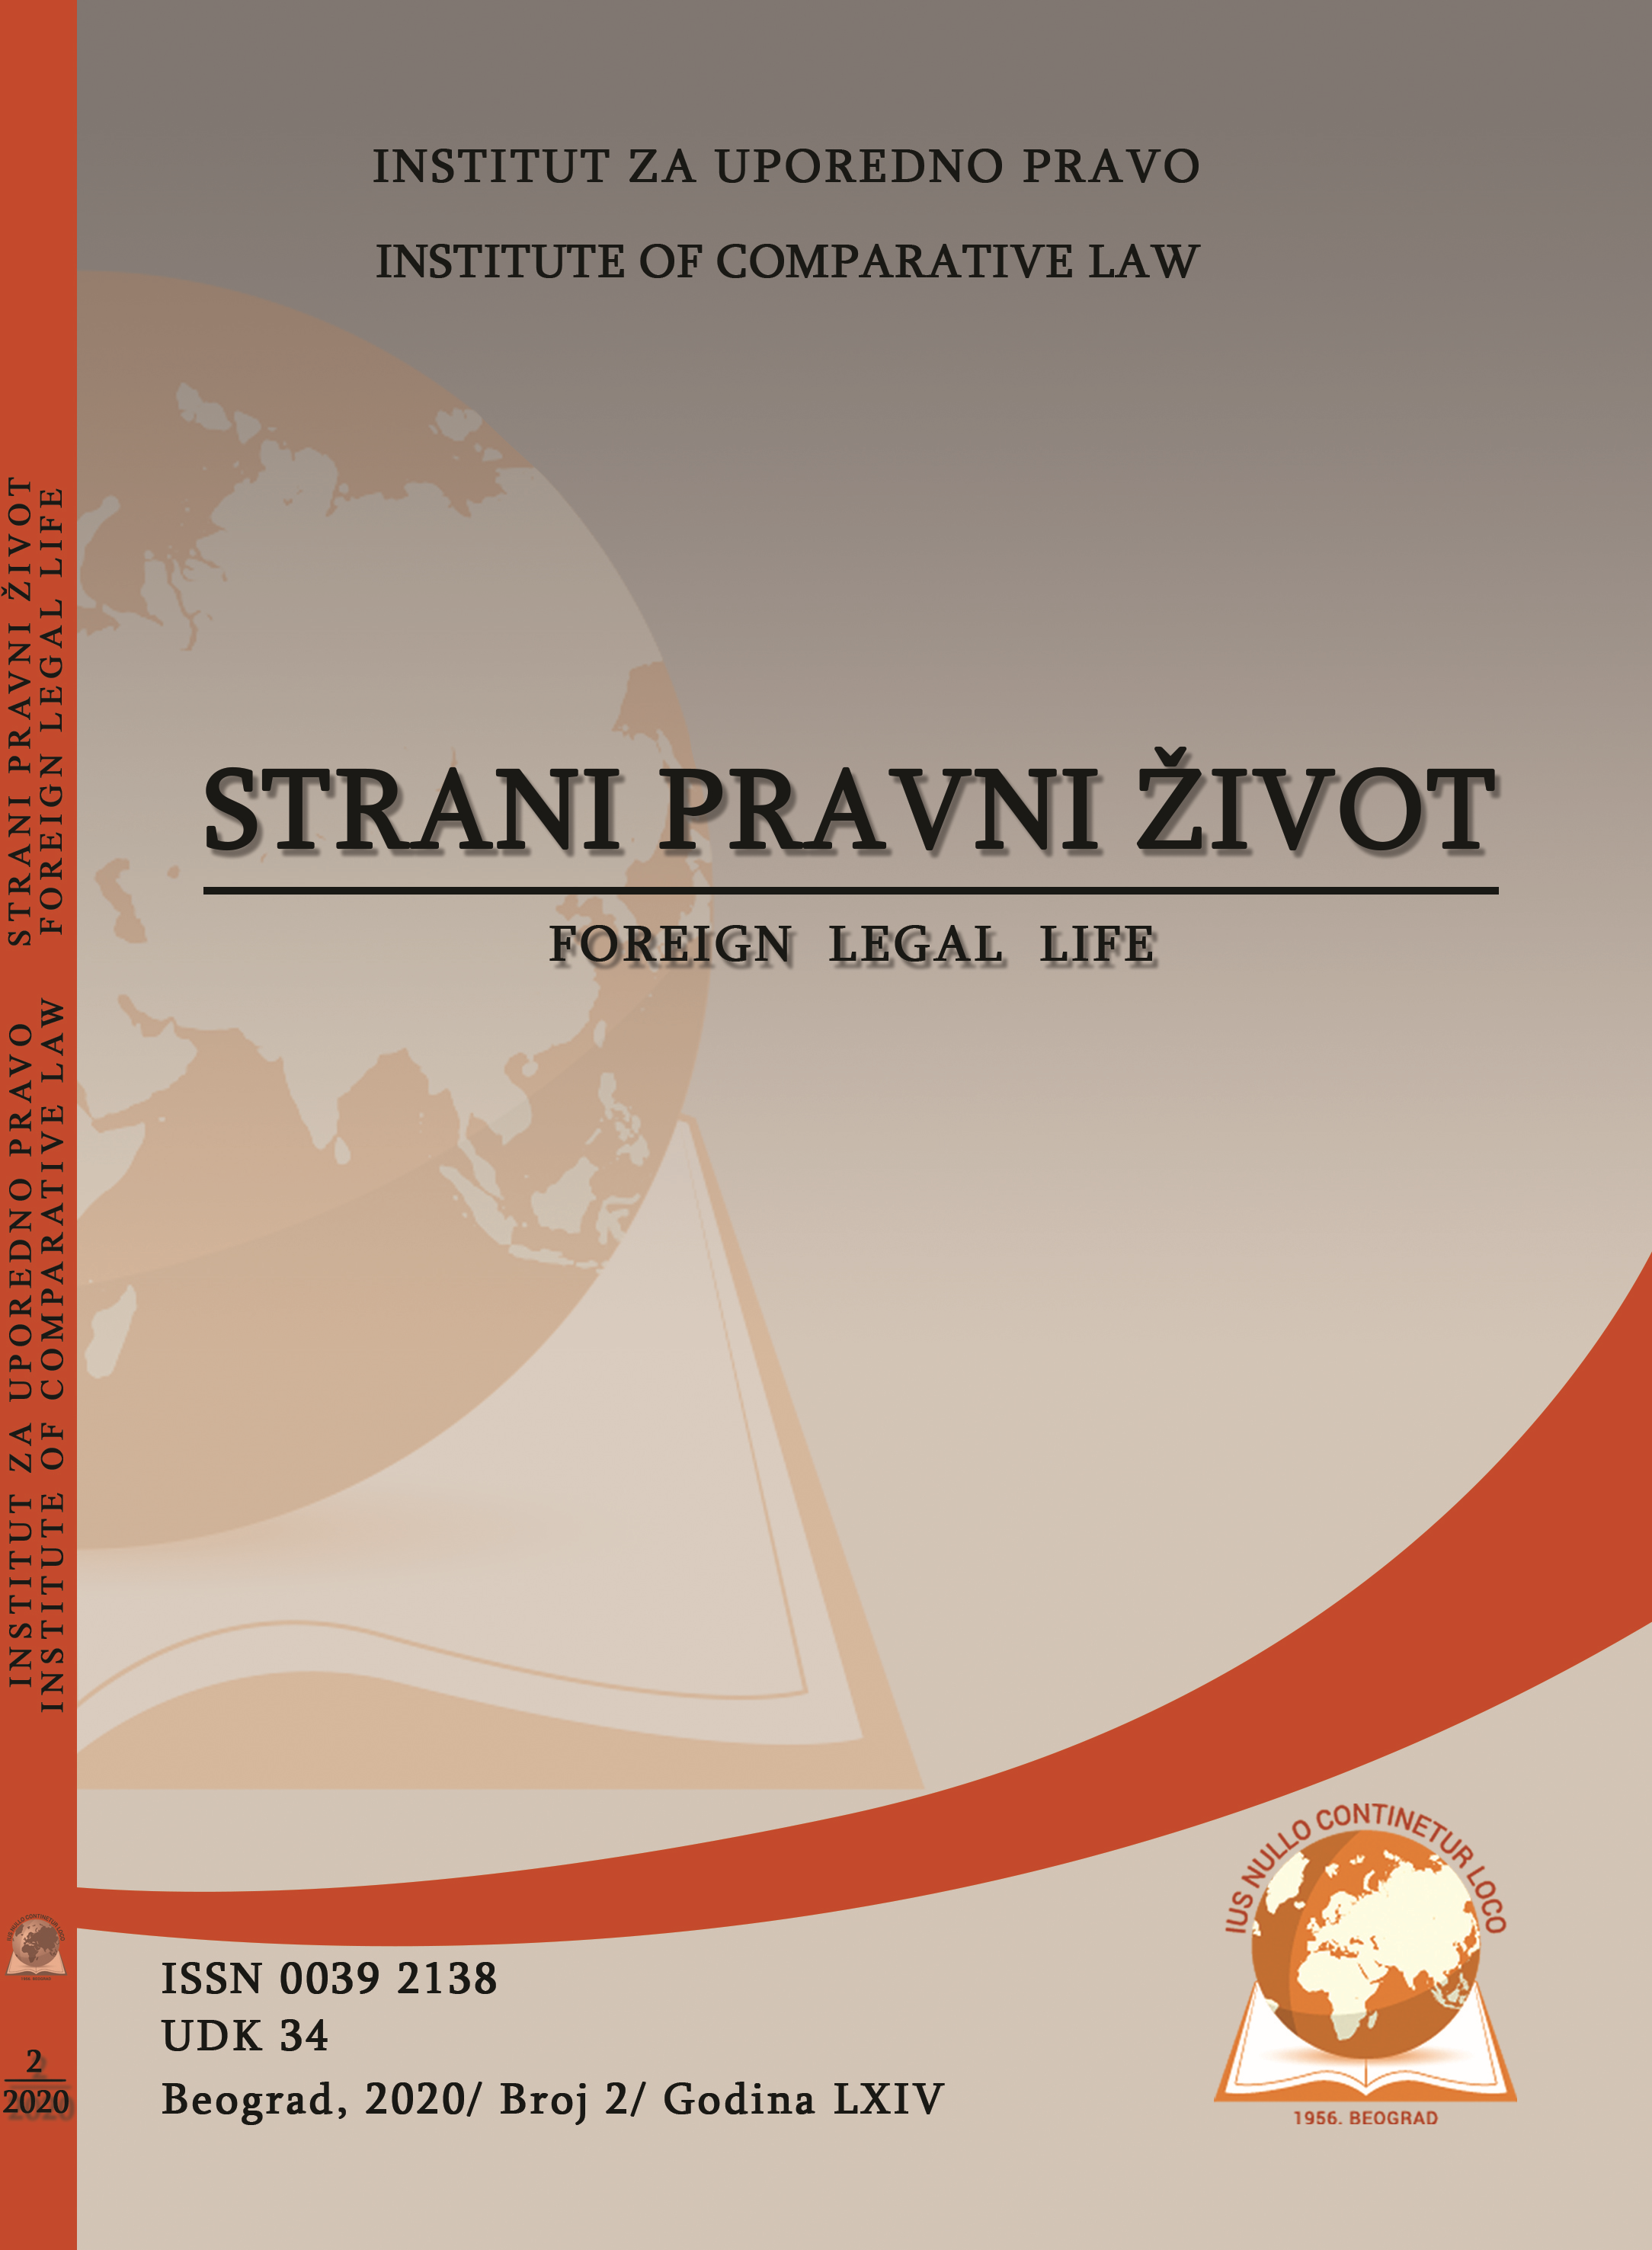 PRESECULAR CHARACHTER OF MONTENEGRIN LAW ON FREEDOM OF RELIGION IN CONTEXT OF FULLER’S DEMANDS FOR INTERNAL MORALITY OF LAW Cover Image